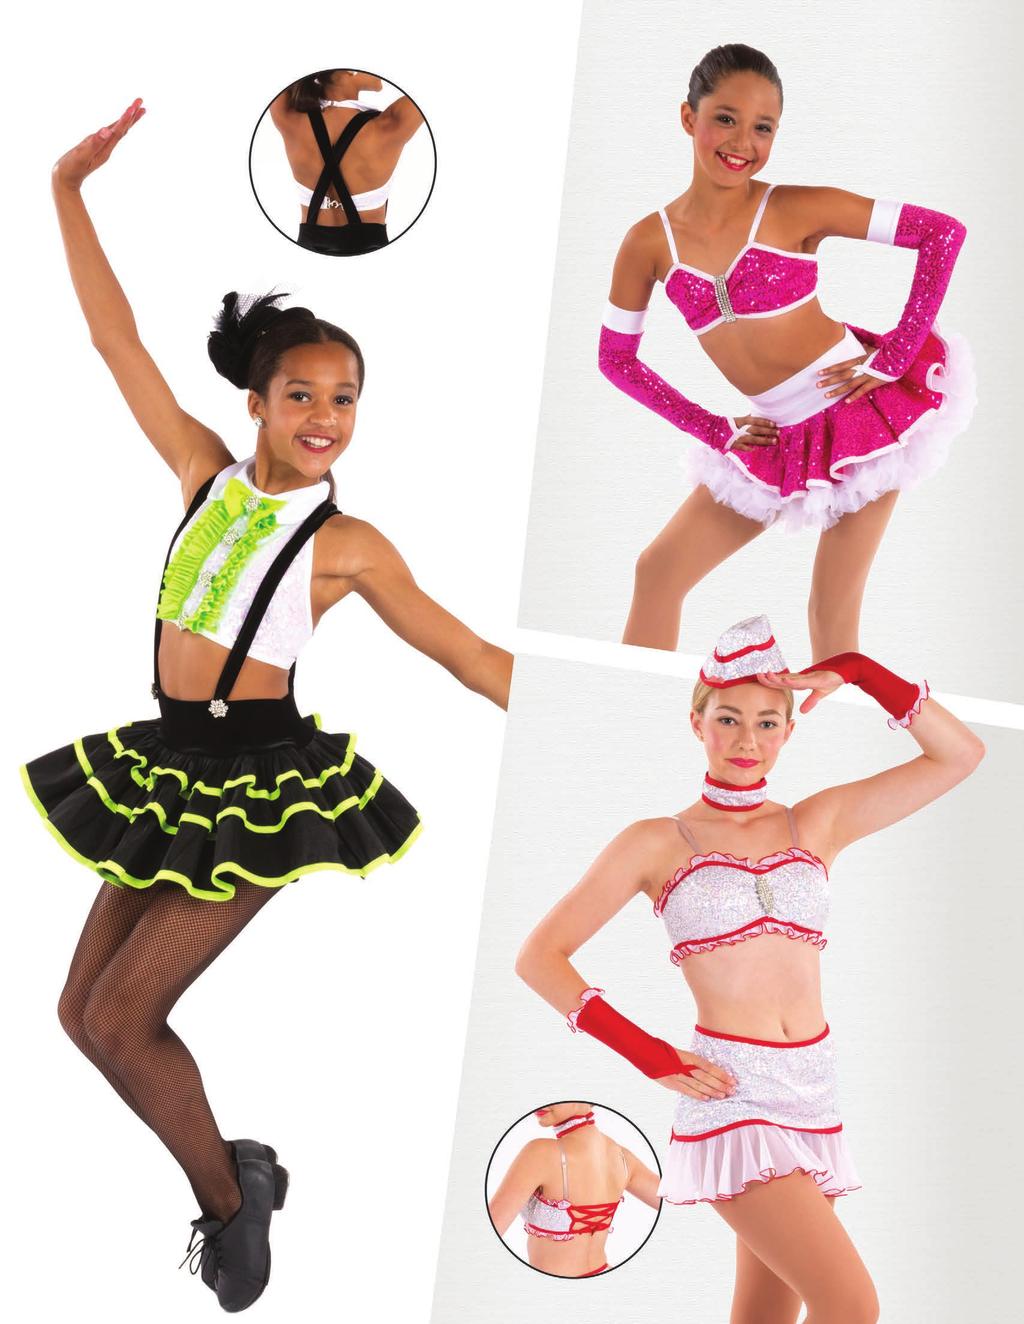 81547 TOP, SKIRT, MITTS & HAIR (OPT) Accent is white or black Shown: Hot Pink/White 81542 TOP, SKIRT, HAT (OPT) Black & white stay same Colors: Lime, Hot Pink,